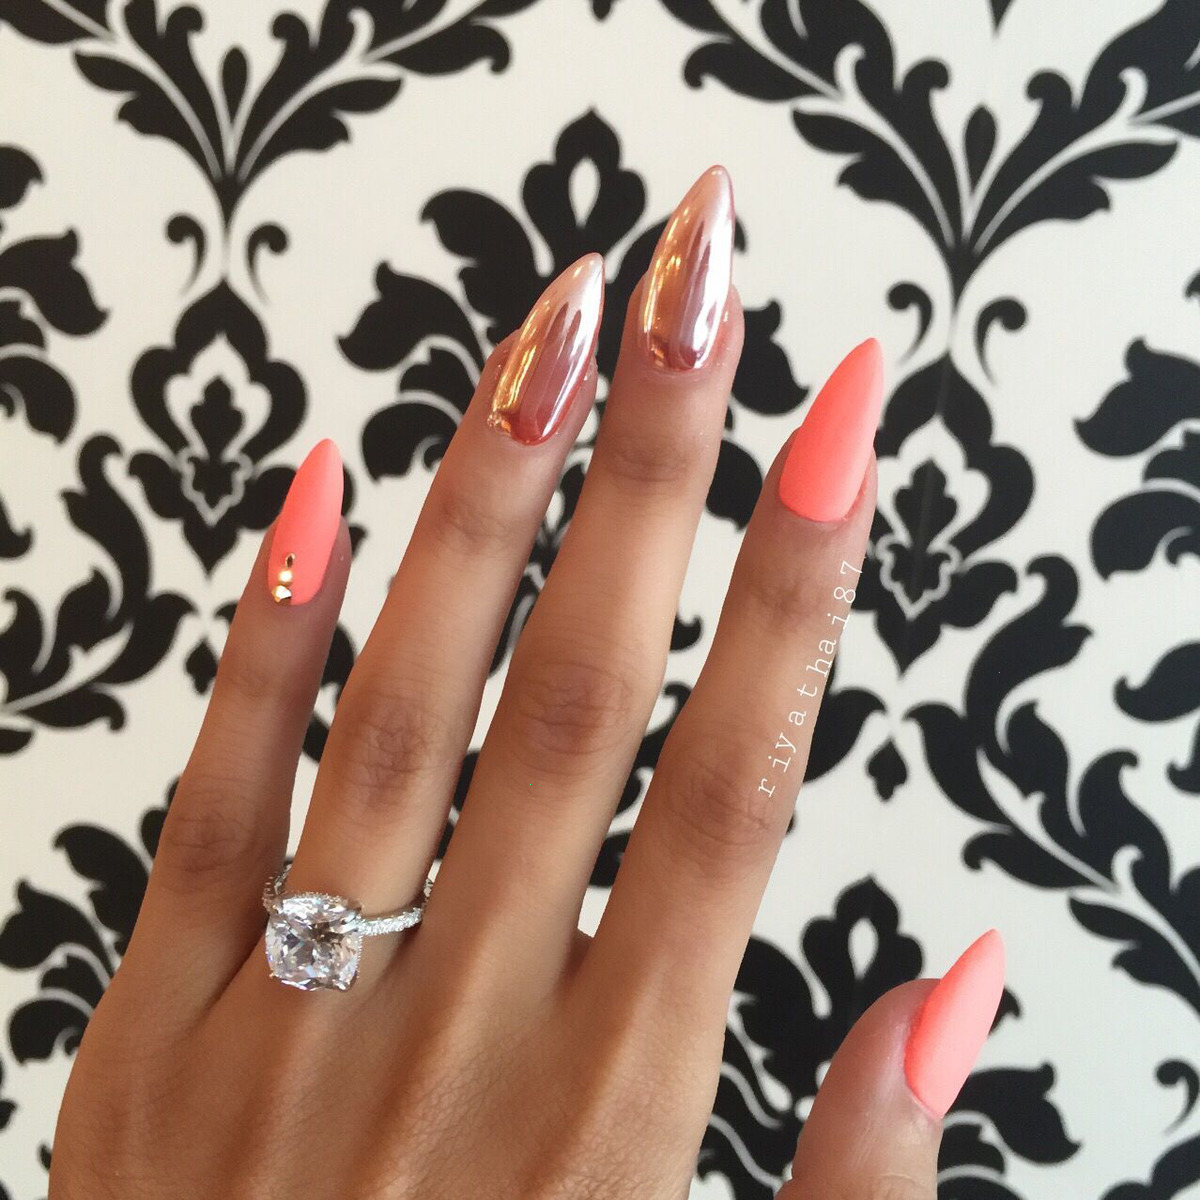 New Year Nails To Ring In 2023 | Glam Nails